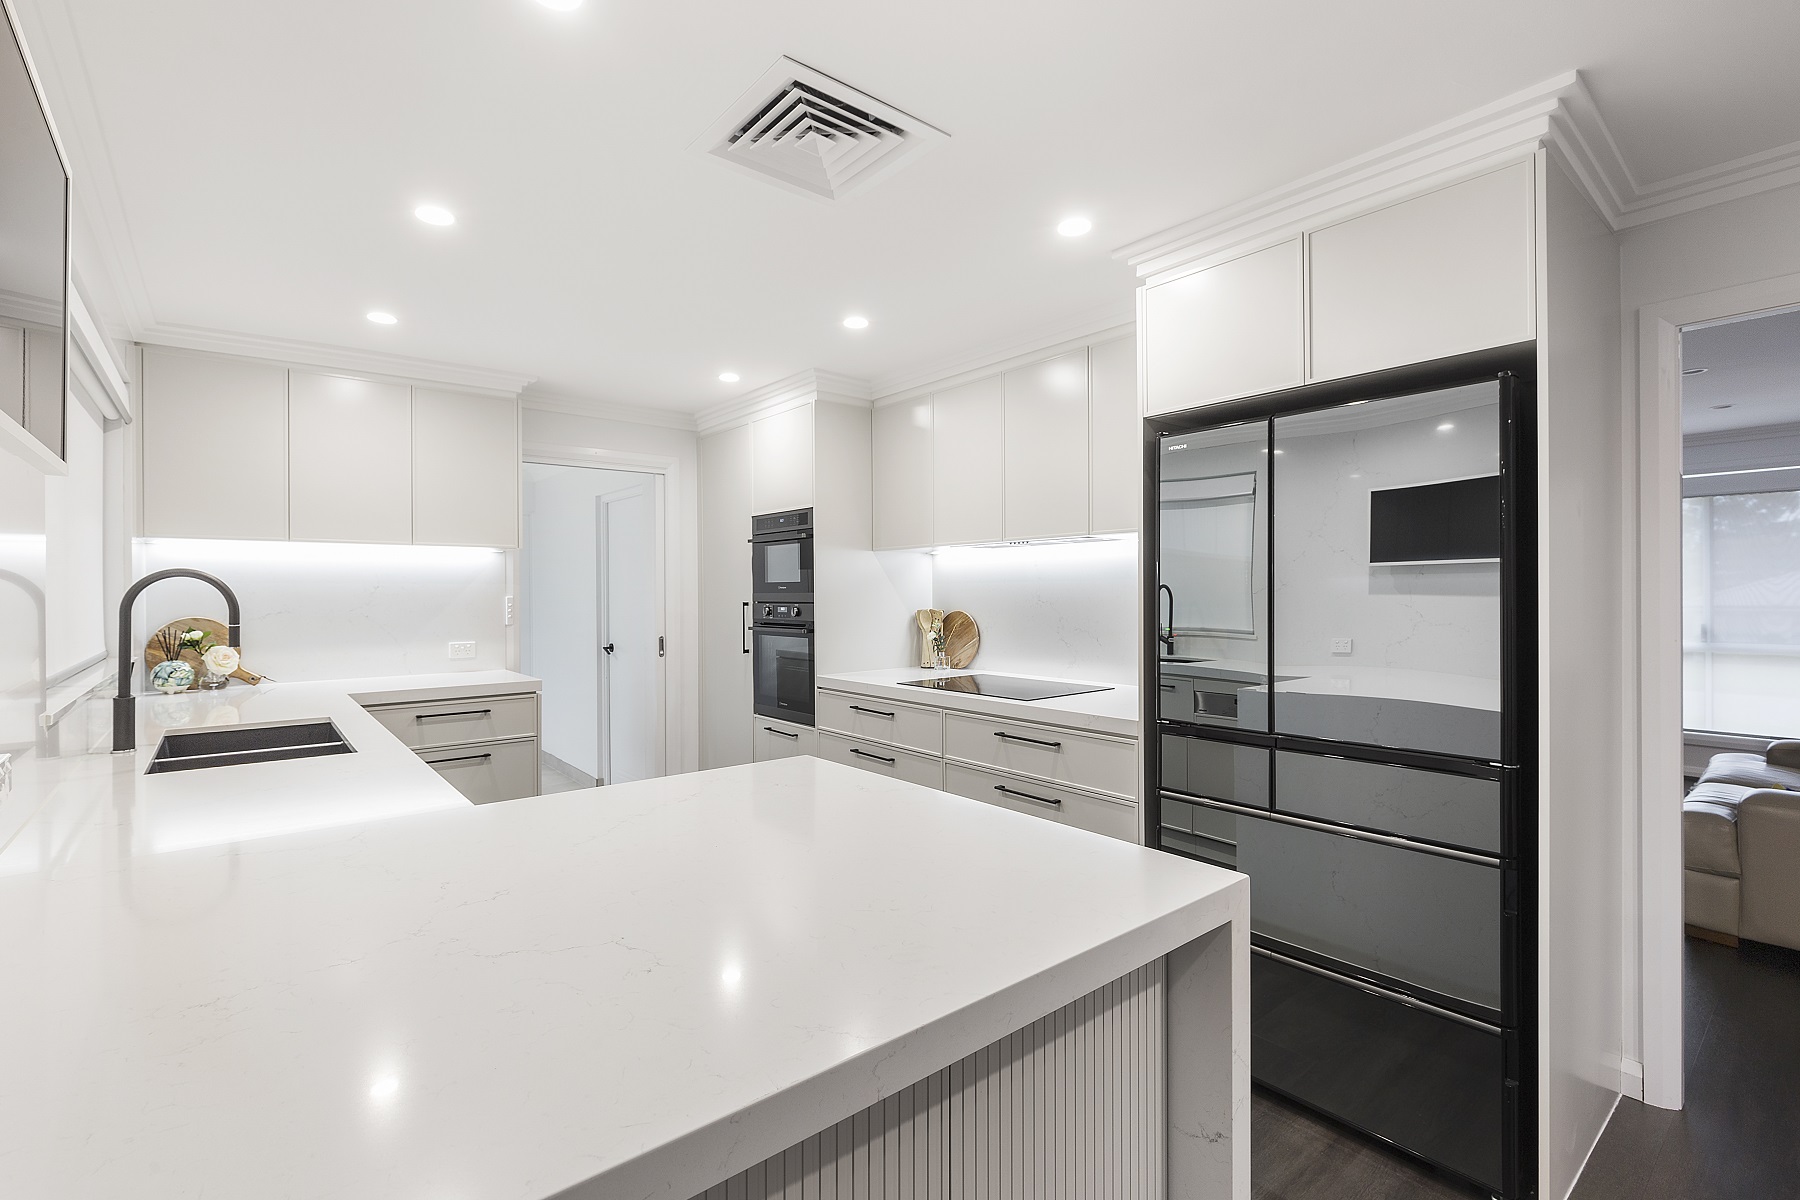 AFTER Moorebank Renovation, Polyurethane Thin Shaker kitchen with a stone benchtop and featuring a fluted paneled breakfast bar